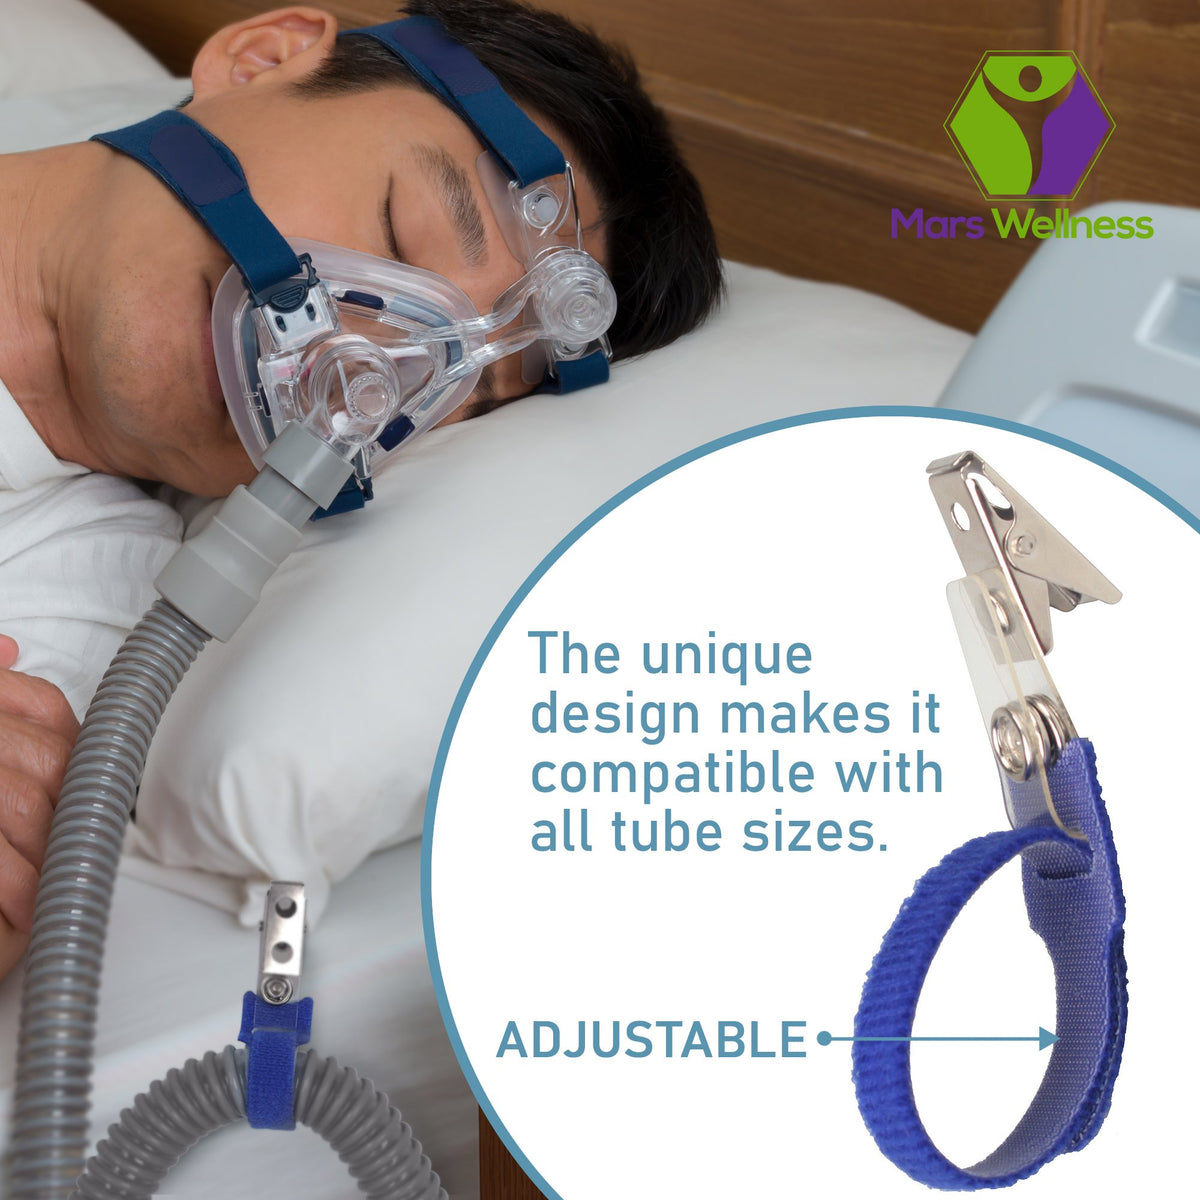 CPAP Hose Holder Clip - Oxygen Tube/Cannula Holder - Tangle Free CPAP Tube